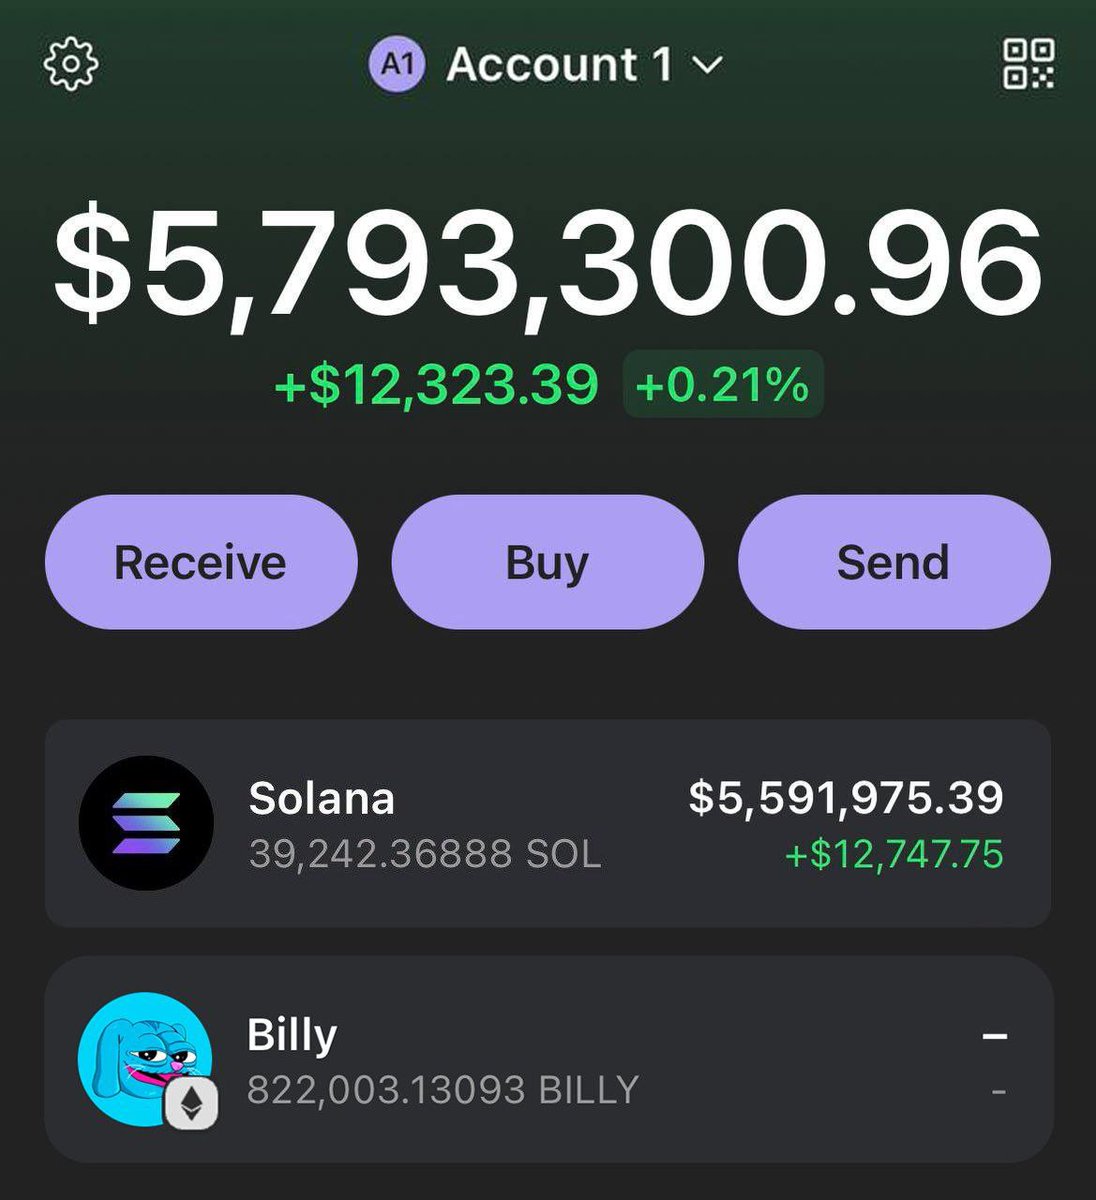 I made over $5,000,000 with crypto this month.

To celebrate I’ll be giving away another $10,000 to 5 random people.

To participate just like, RT and your comment address

Now I’m revealing my next trade, I just put 5 ETH into @BillyBaseCoin, they just launched their presale on